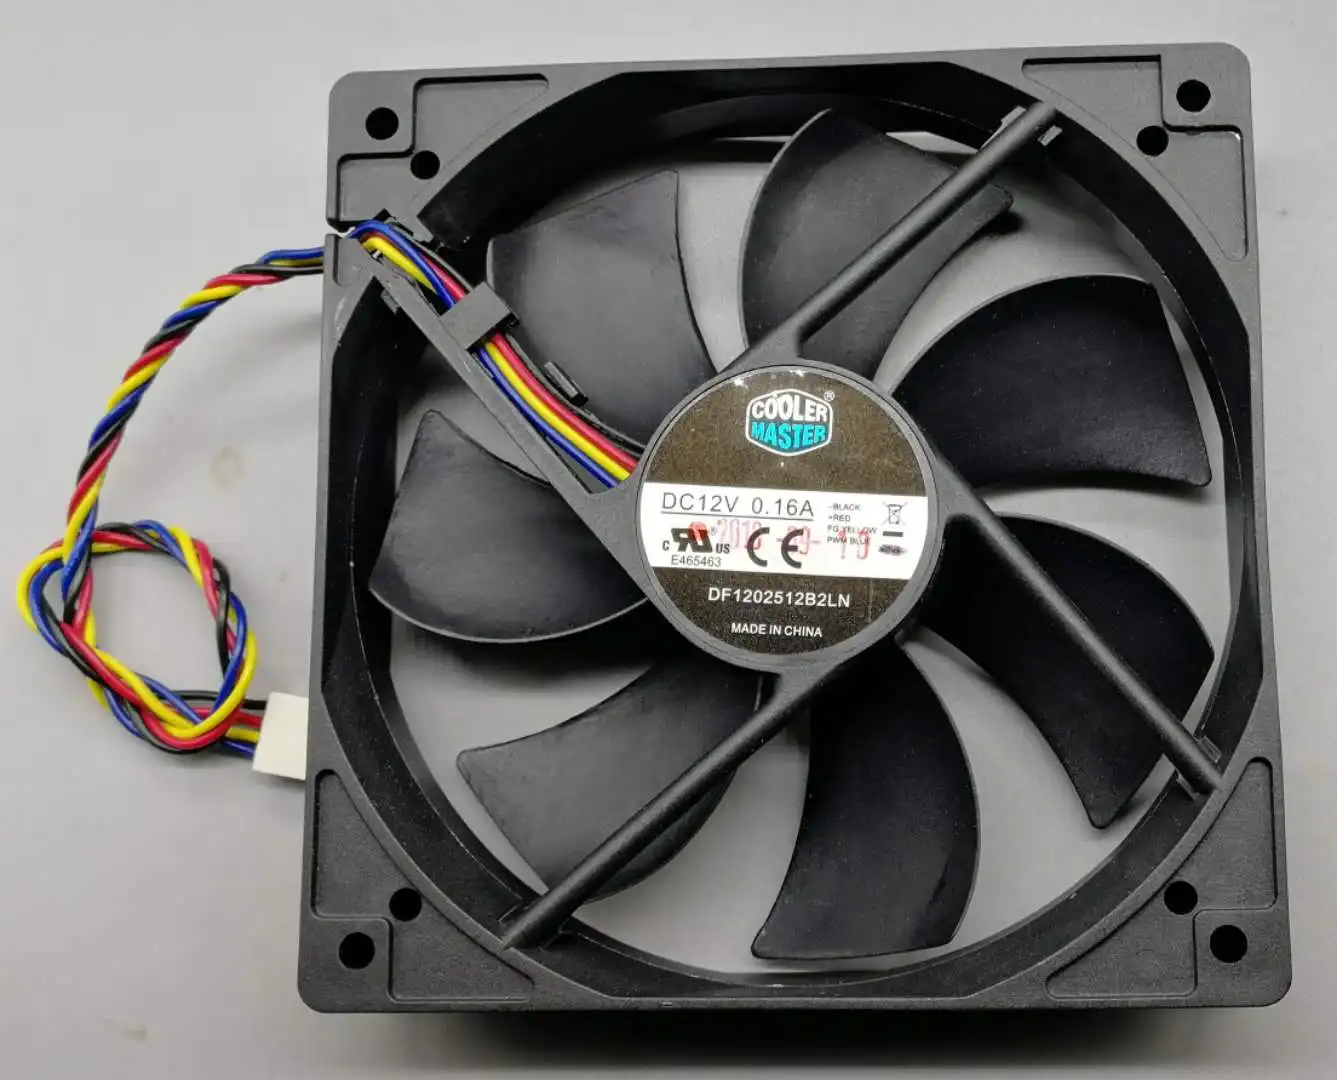 

DF1202512B2LN 120mm 12cm Cooling Fan 120X25 DC 12V Double Ball 4-pin PWM Ultra-Quiet Chassis Case Cooler